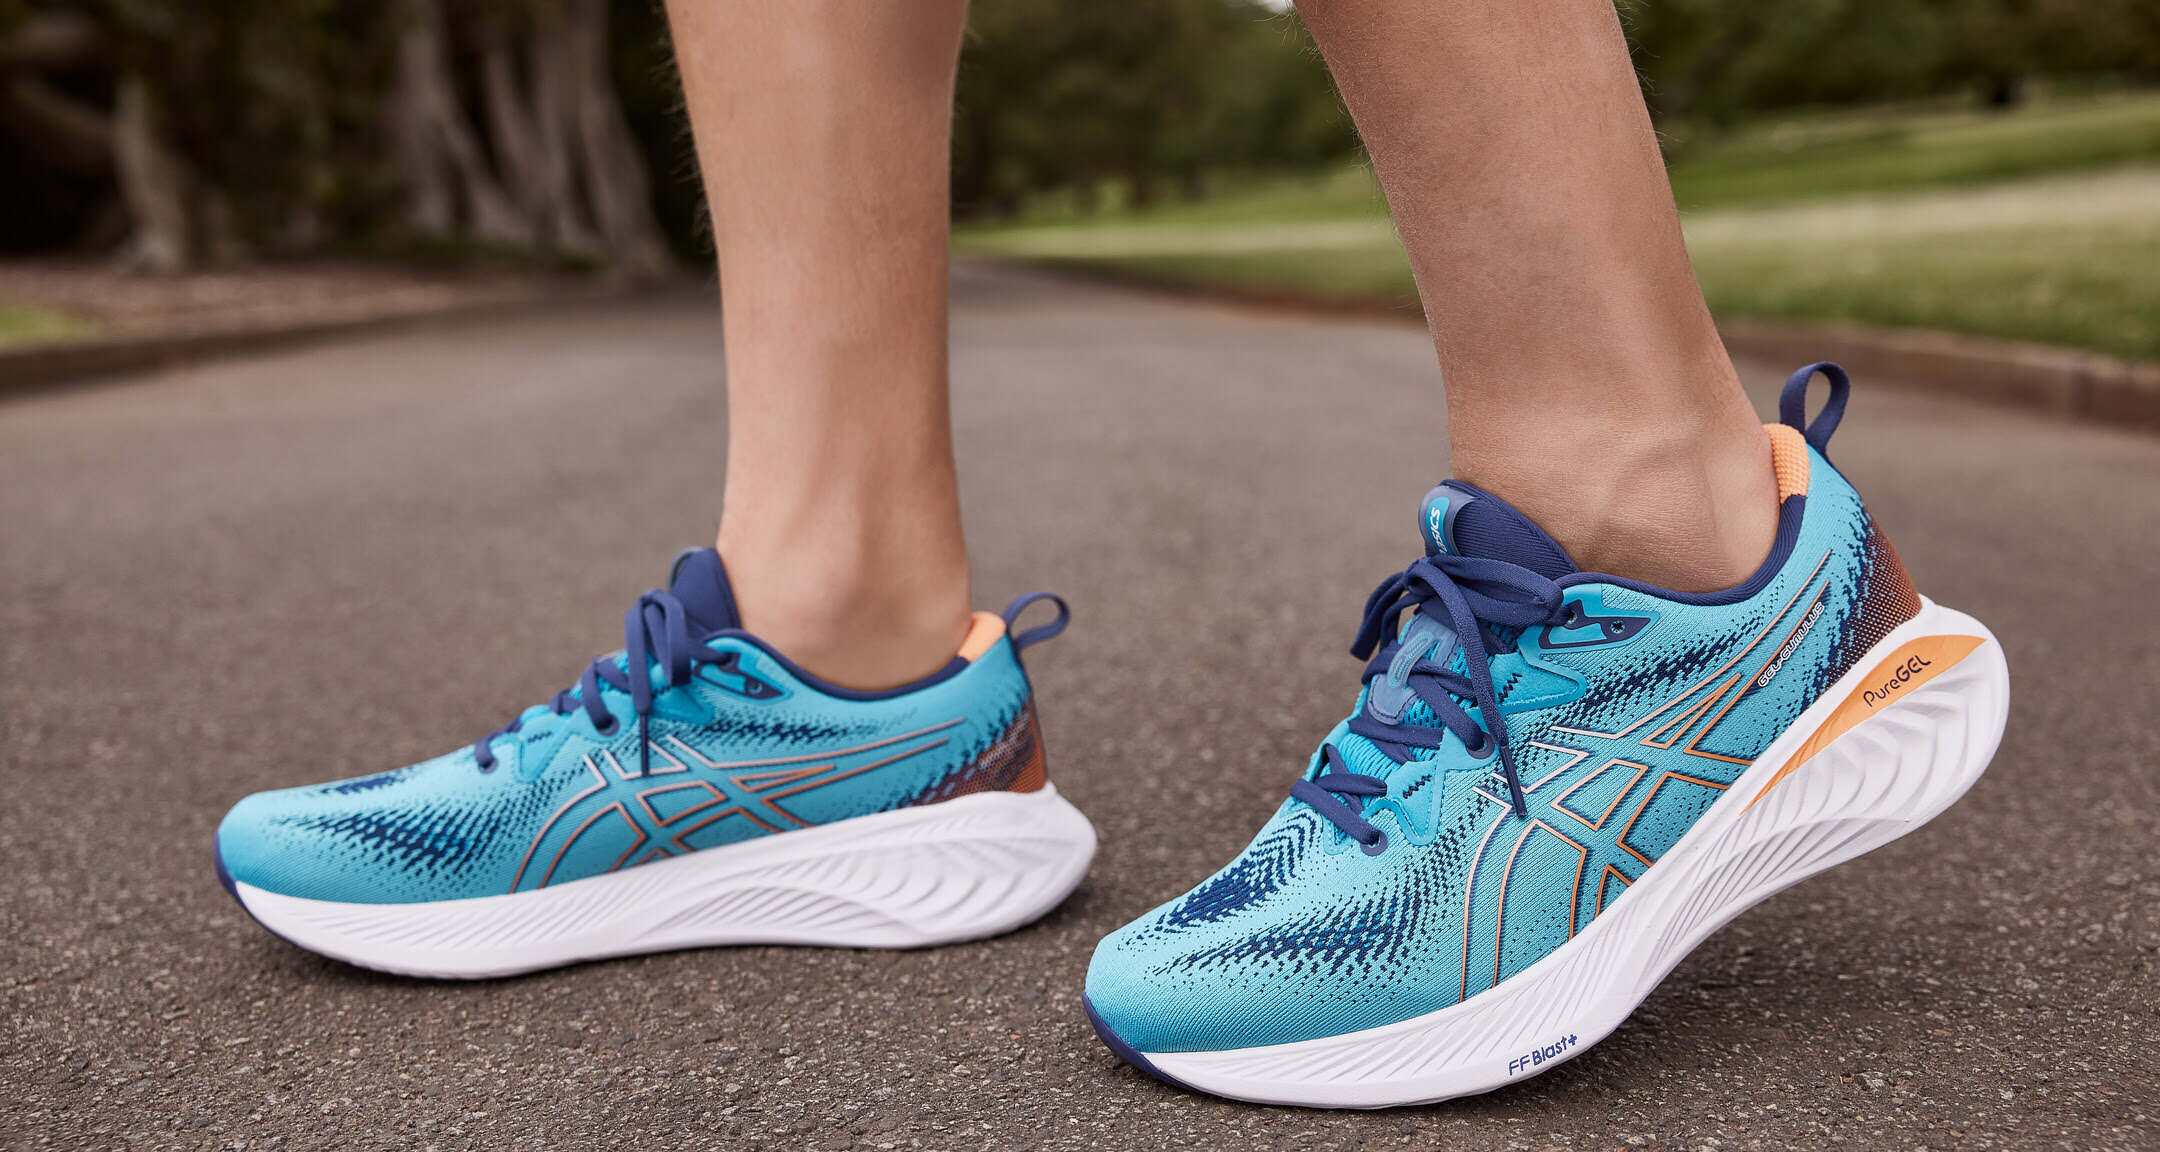 Best Running Shoes for Bunions 2020 